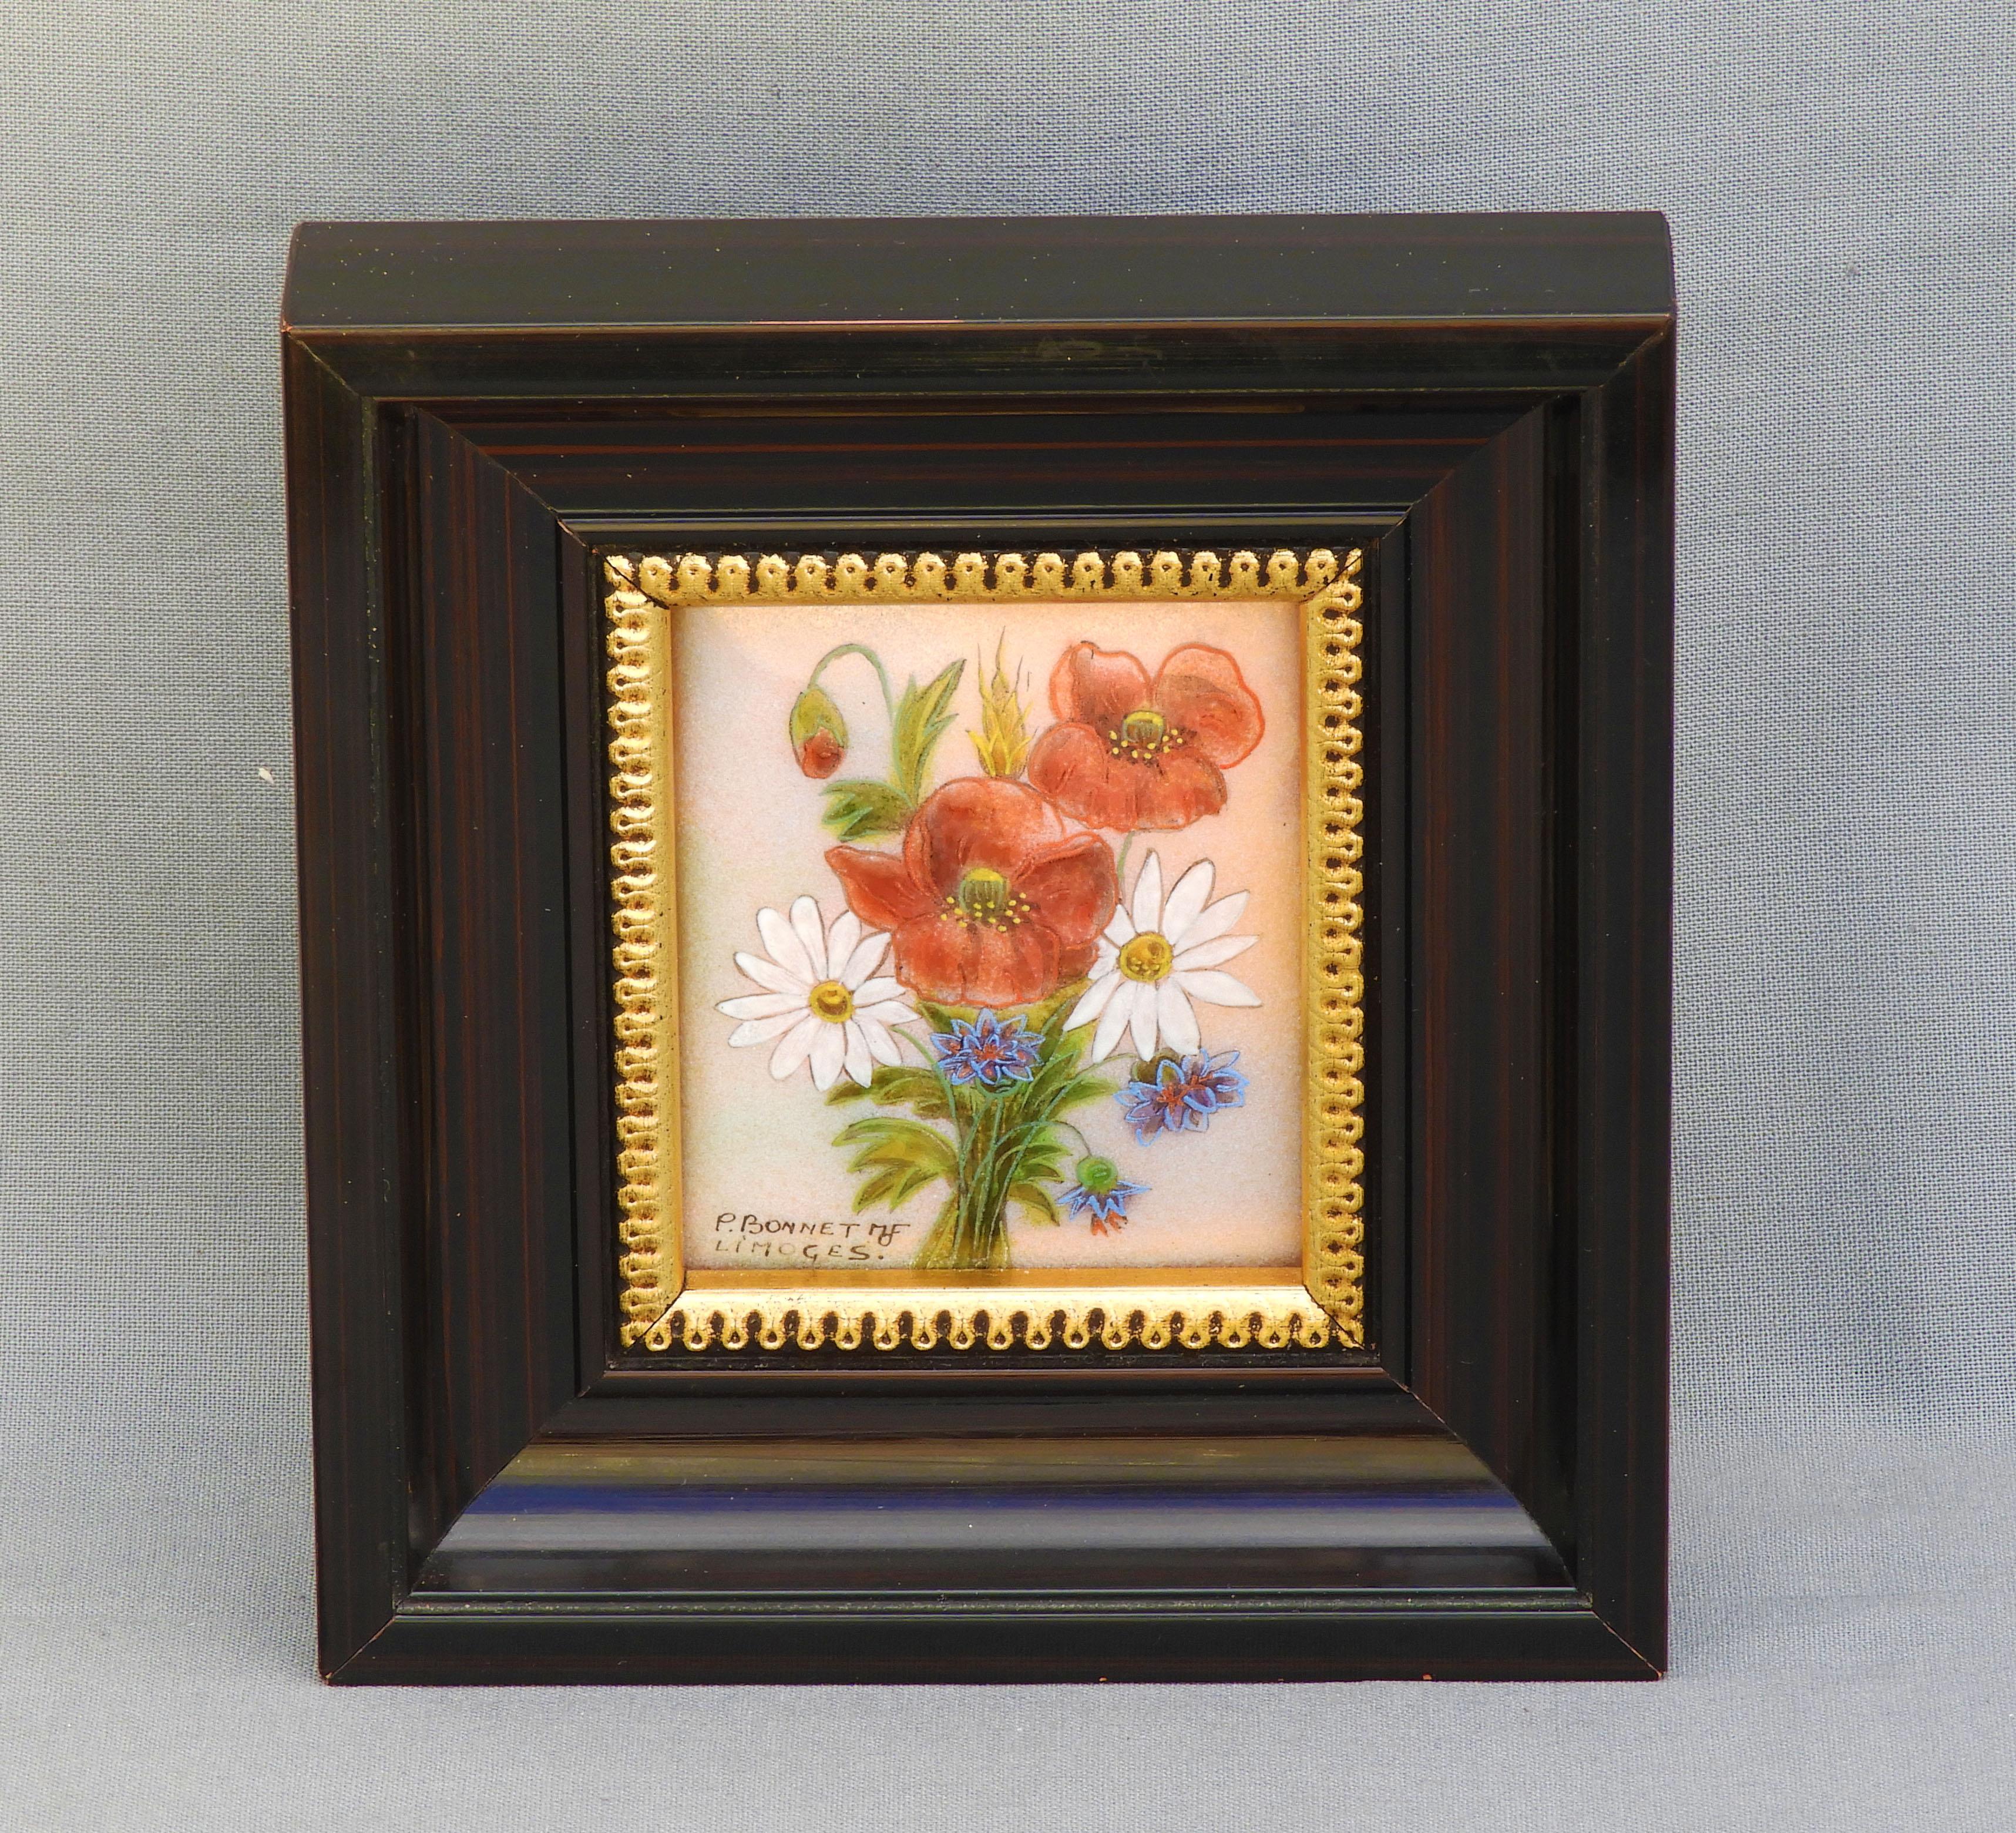 Limoges Miniature Enamel still life plaque by P Bonnet

Charming still life Miniature Enamel plaque.

Hand painted bouquet of poppies, daisies and cornflowers.

Signed P. Bonnet MF, Limoges Master Enameller

France, circa 1930

Dimensions